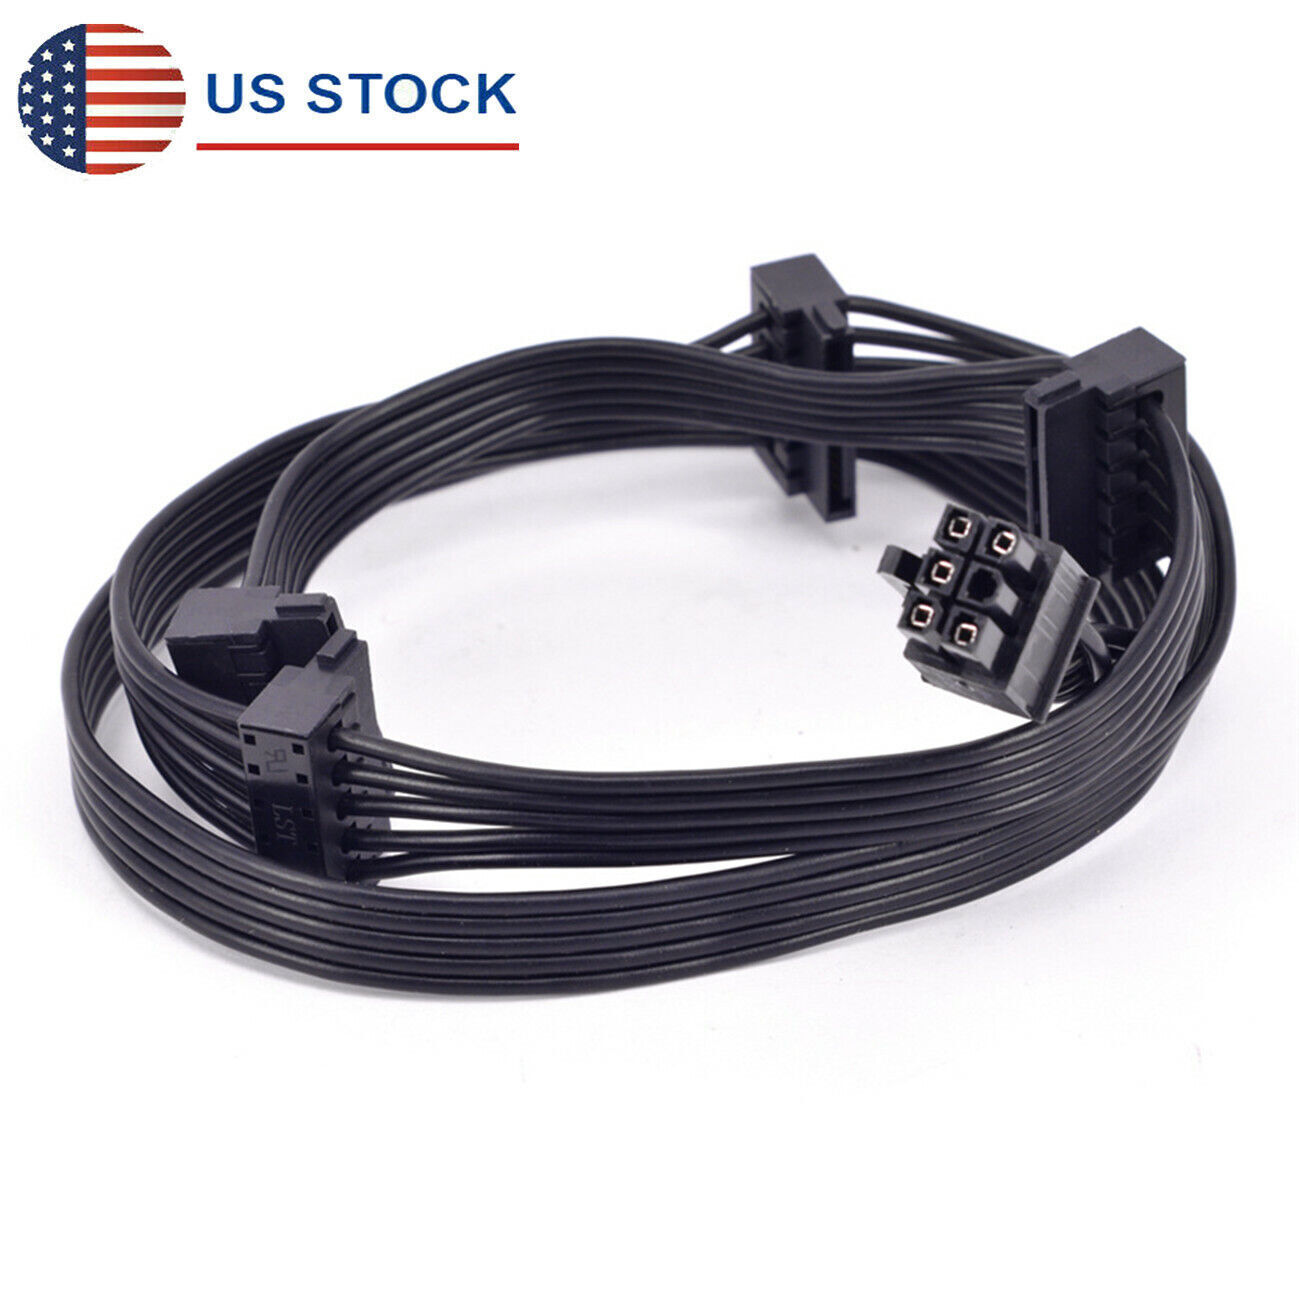 PCI-E 6 Pin Male 1 to 4 SATA 15 Pin Power Supply Cable For Corsair RMx Series US